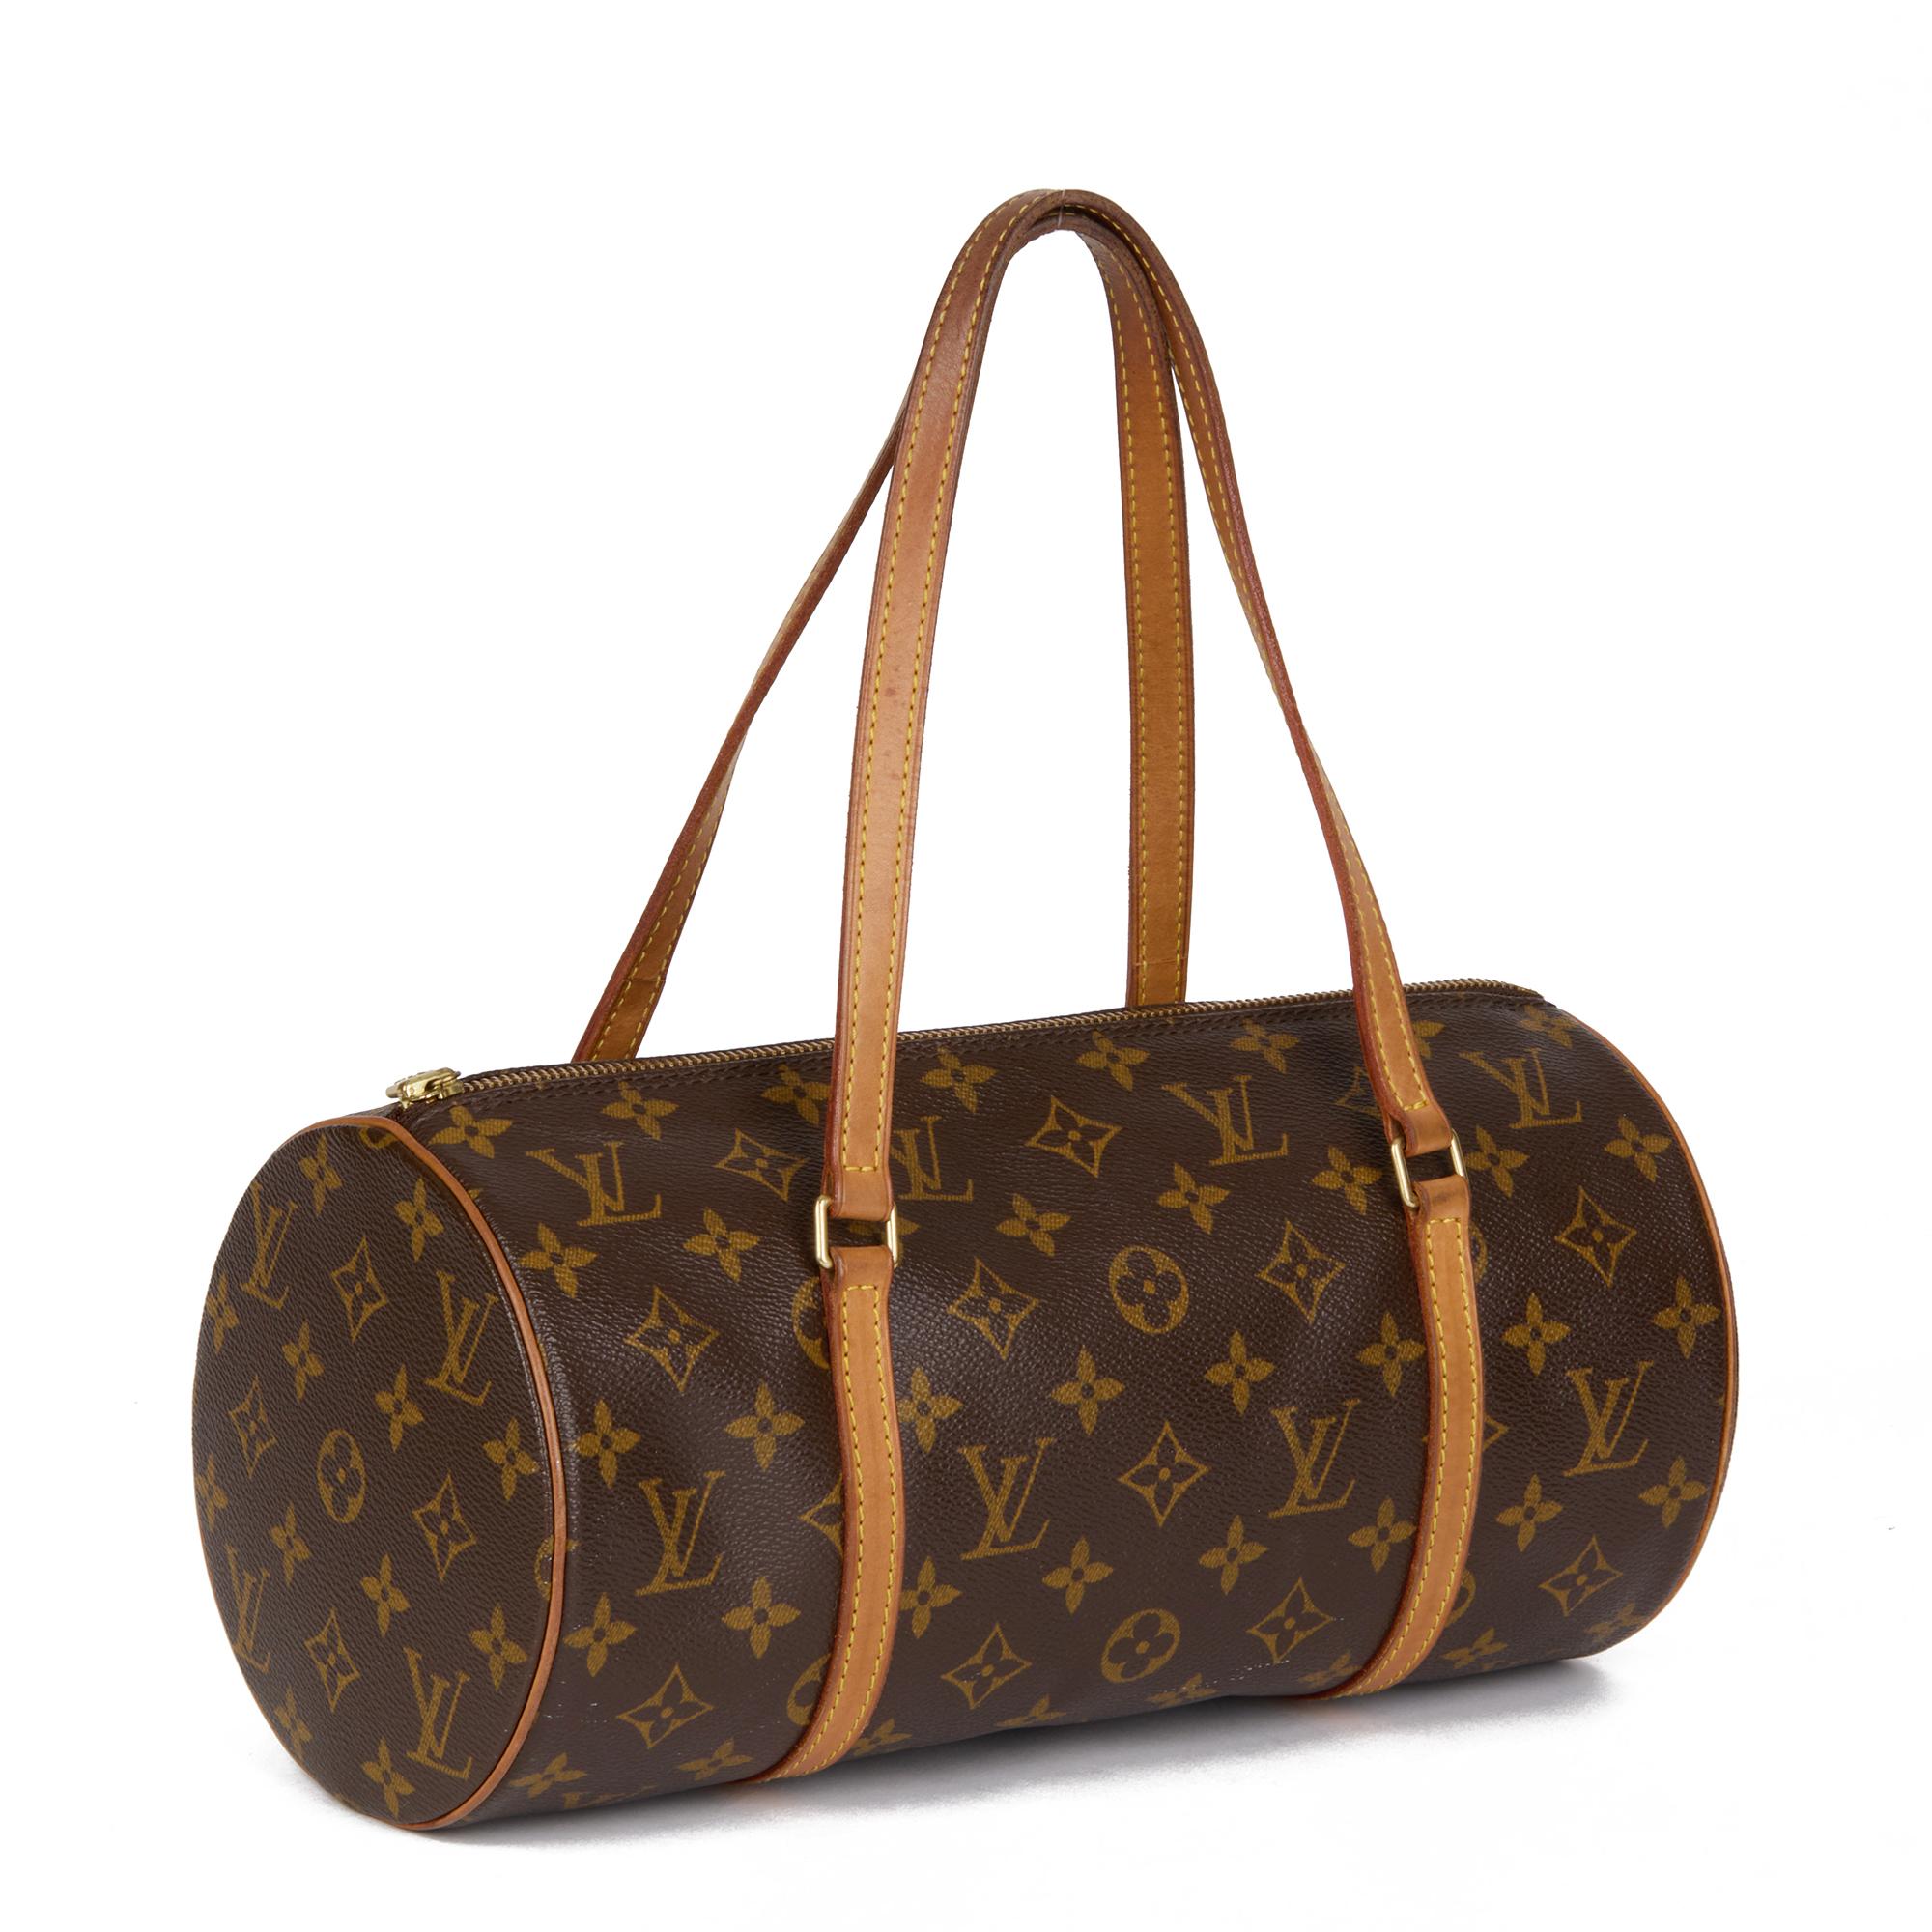 LOUIS VUITTON
Brown Monogram Coated Canvas & Vachetta Leather Vintage Papillon 30

Xupes Reference: CB625
Serial Number: SP1002
Age (Circa): 2002
Authenticity Details: Date Stamp (Made in France)
Gender: Ladies
Type: Tote, Shoulder

Colour: